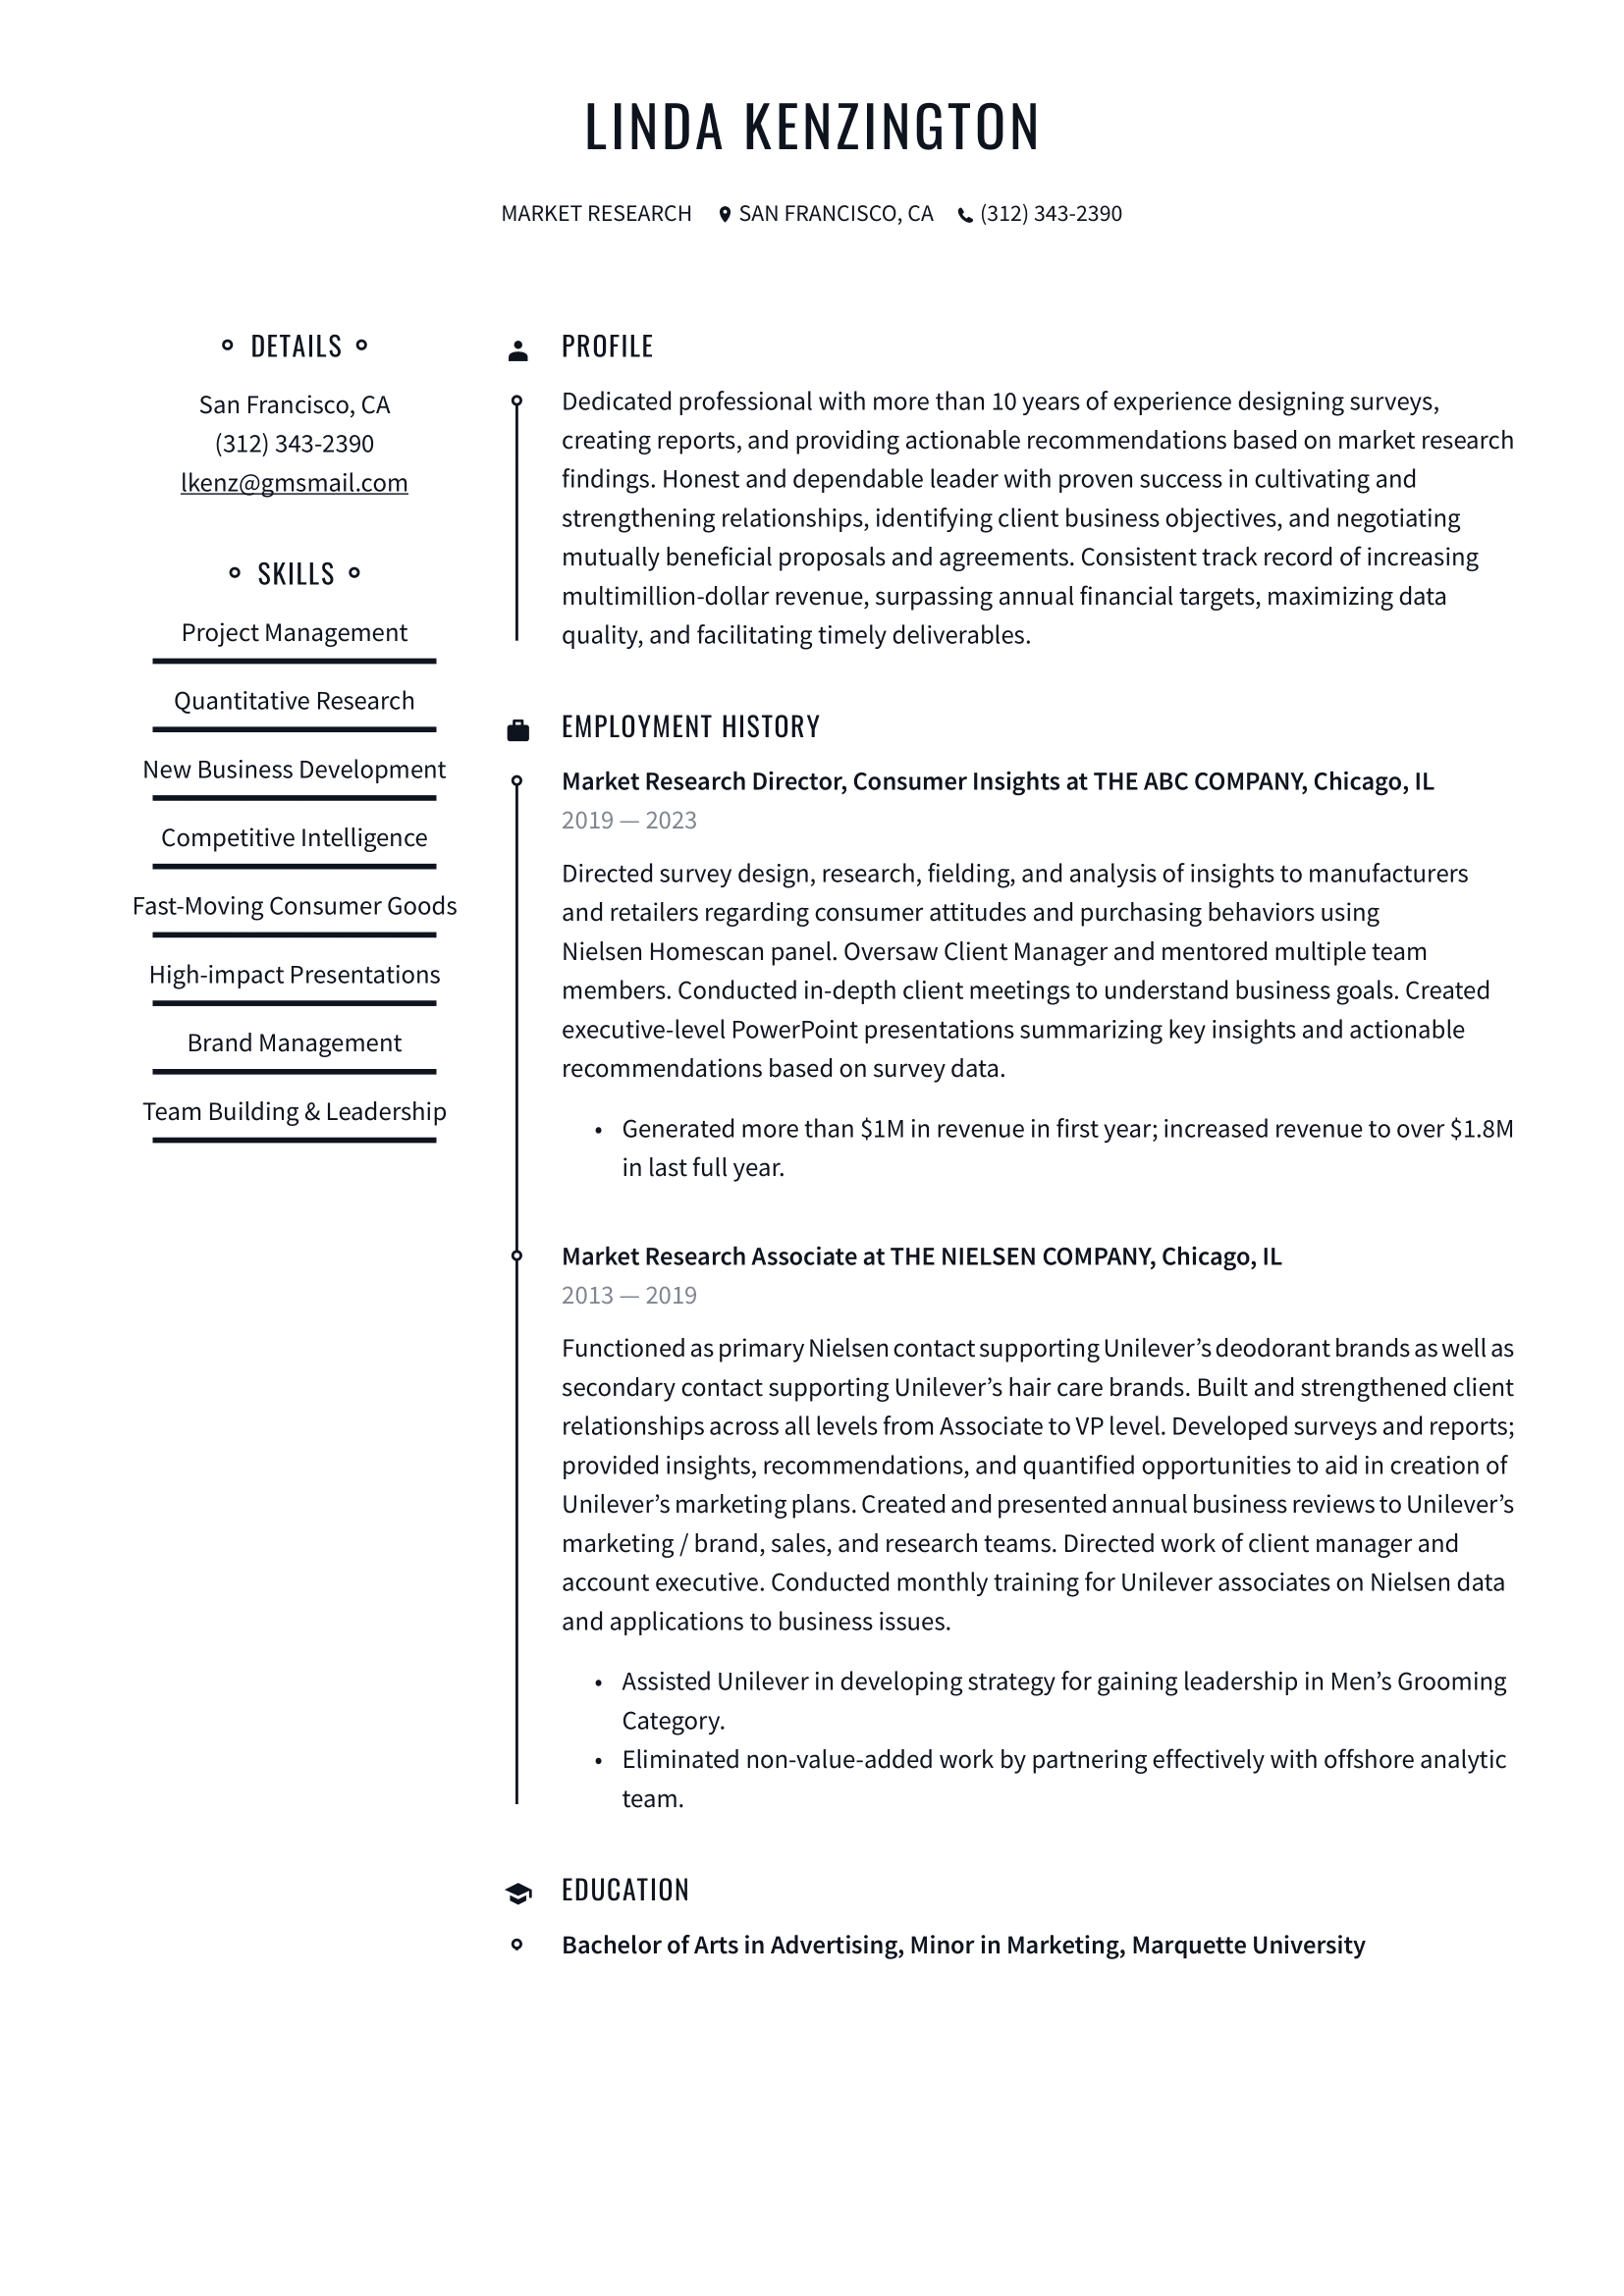 Market Research Resume Example & Writing Guide